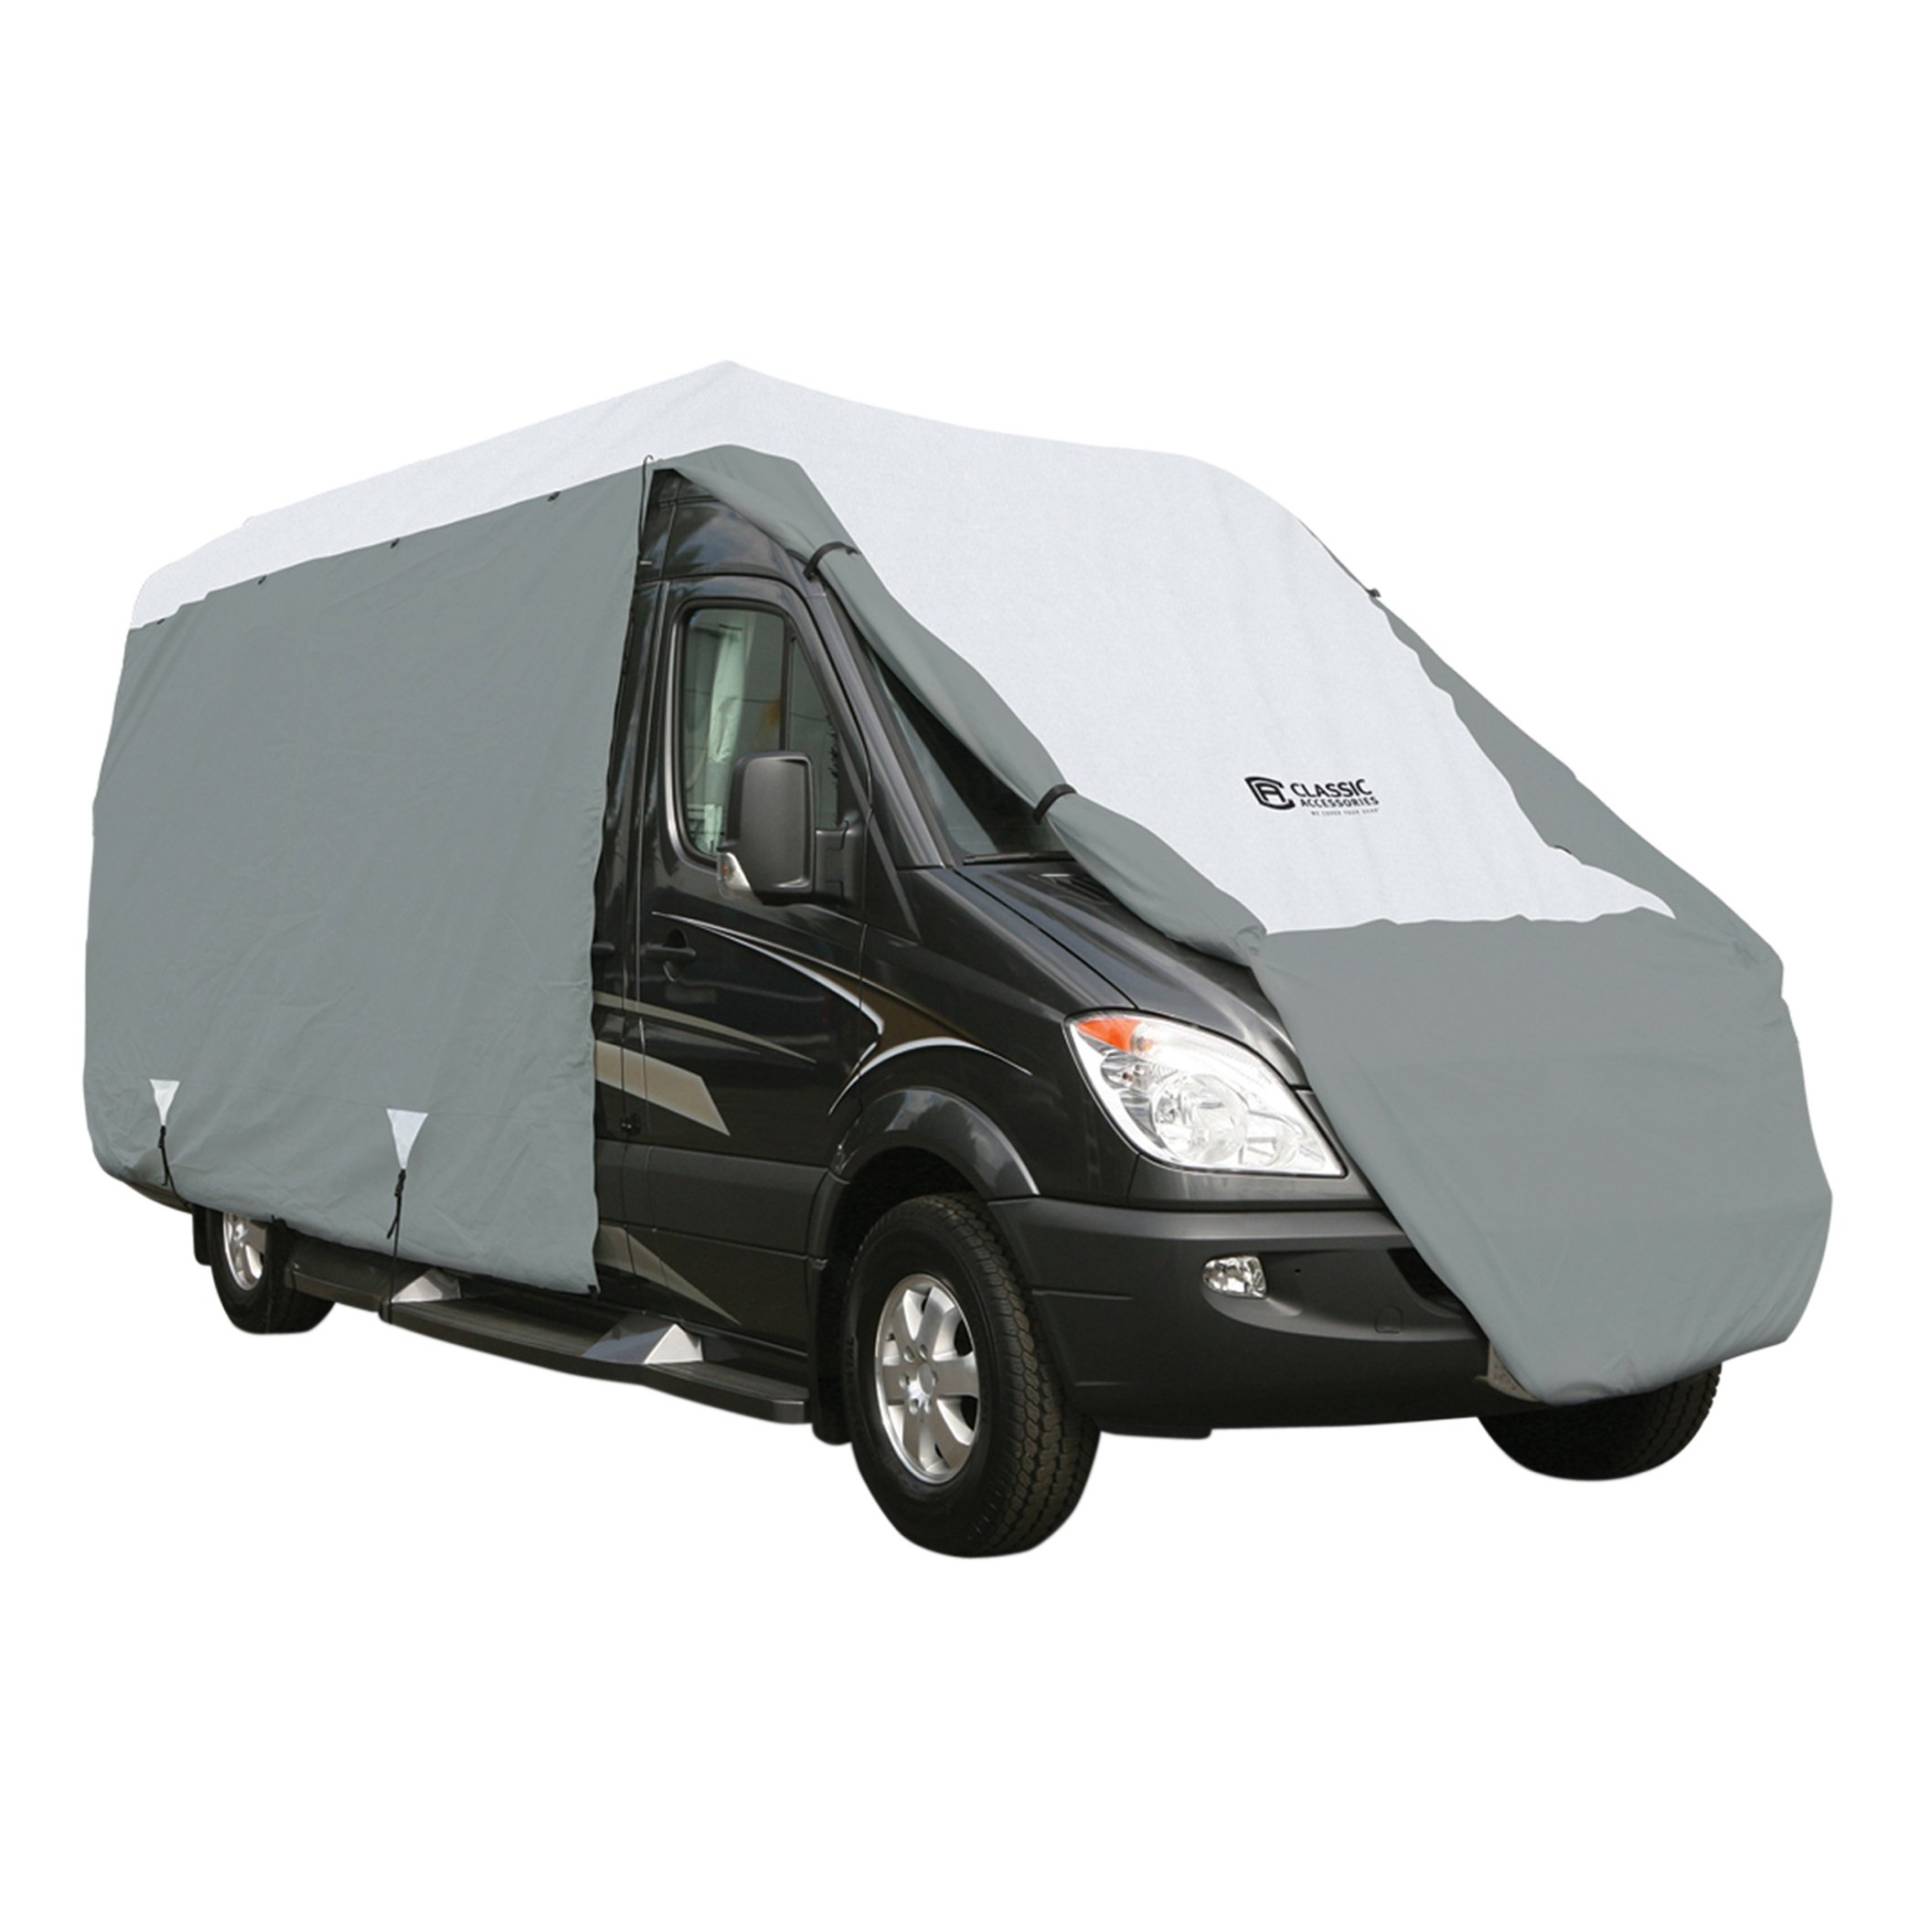 Classic Accessories OverDrive PolyPRO 3 Deluxe Class B RV Cover, Fits 20' - 23' RVs - Max Weather Protection with 3-Ply Poly Fabric Roof RV Cover (80-104-151001-00) von CLASSIC ACCESSORIES